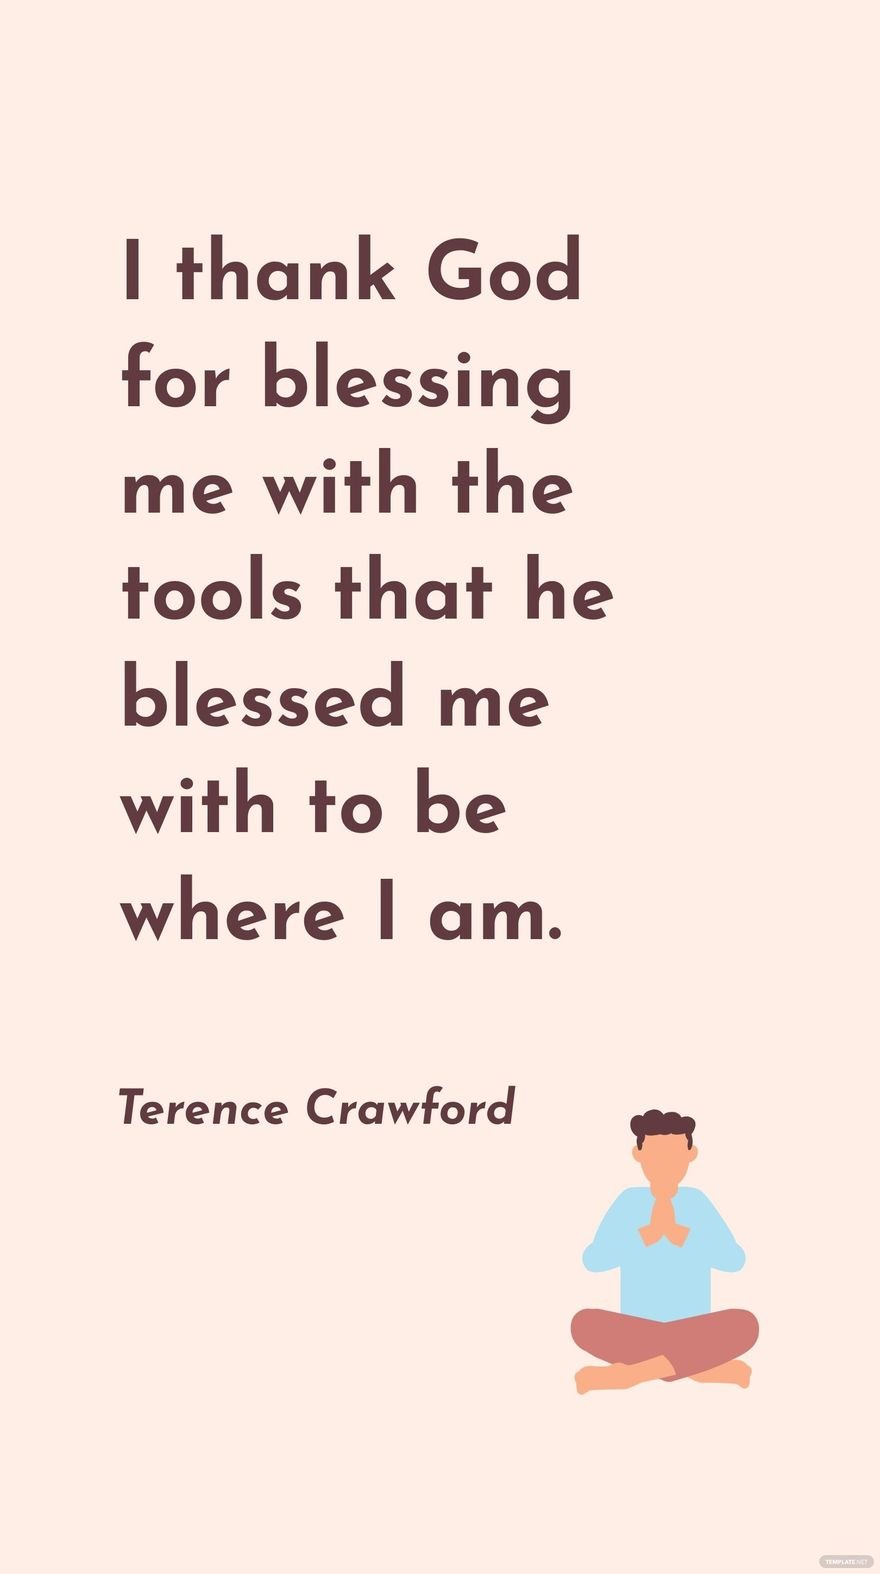 Terence Crawford - I thank God for blessing me with the tools that he blessed me with to be where I am.